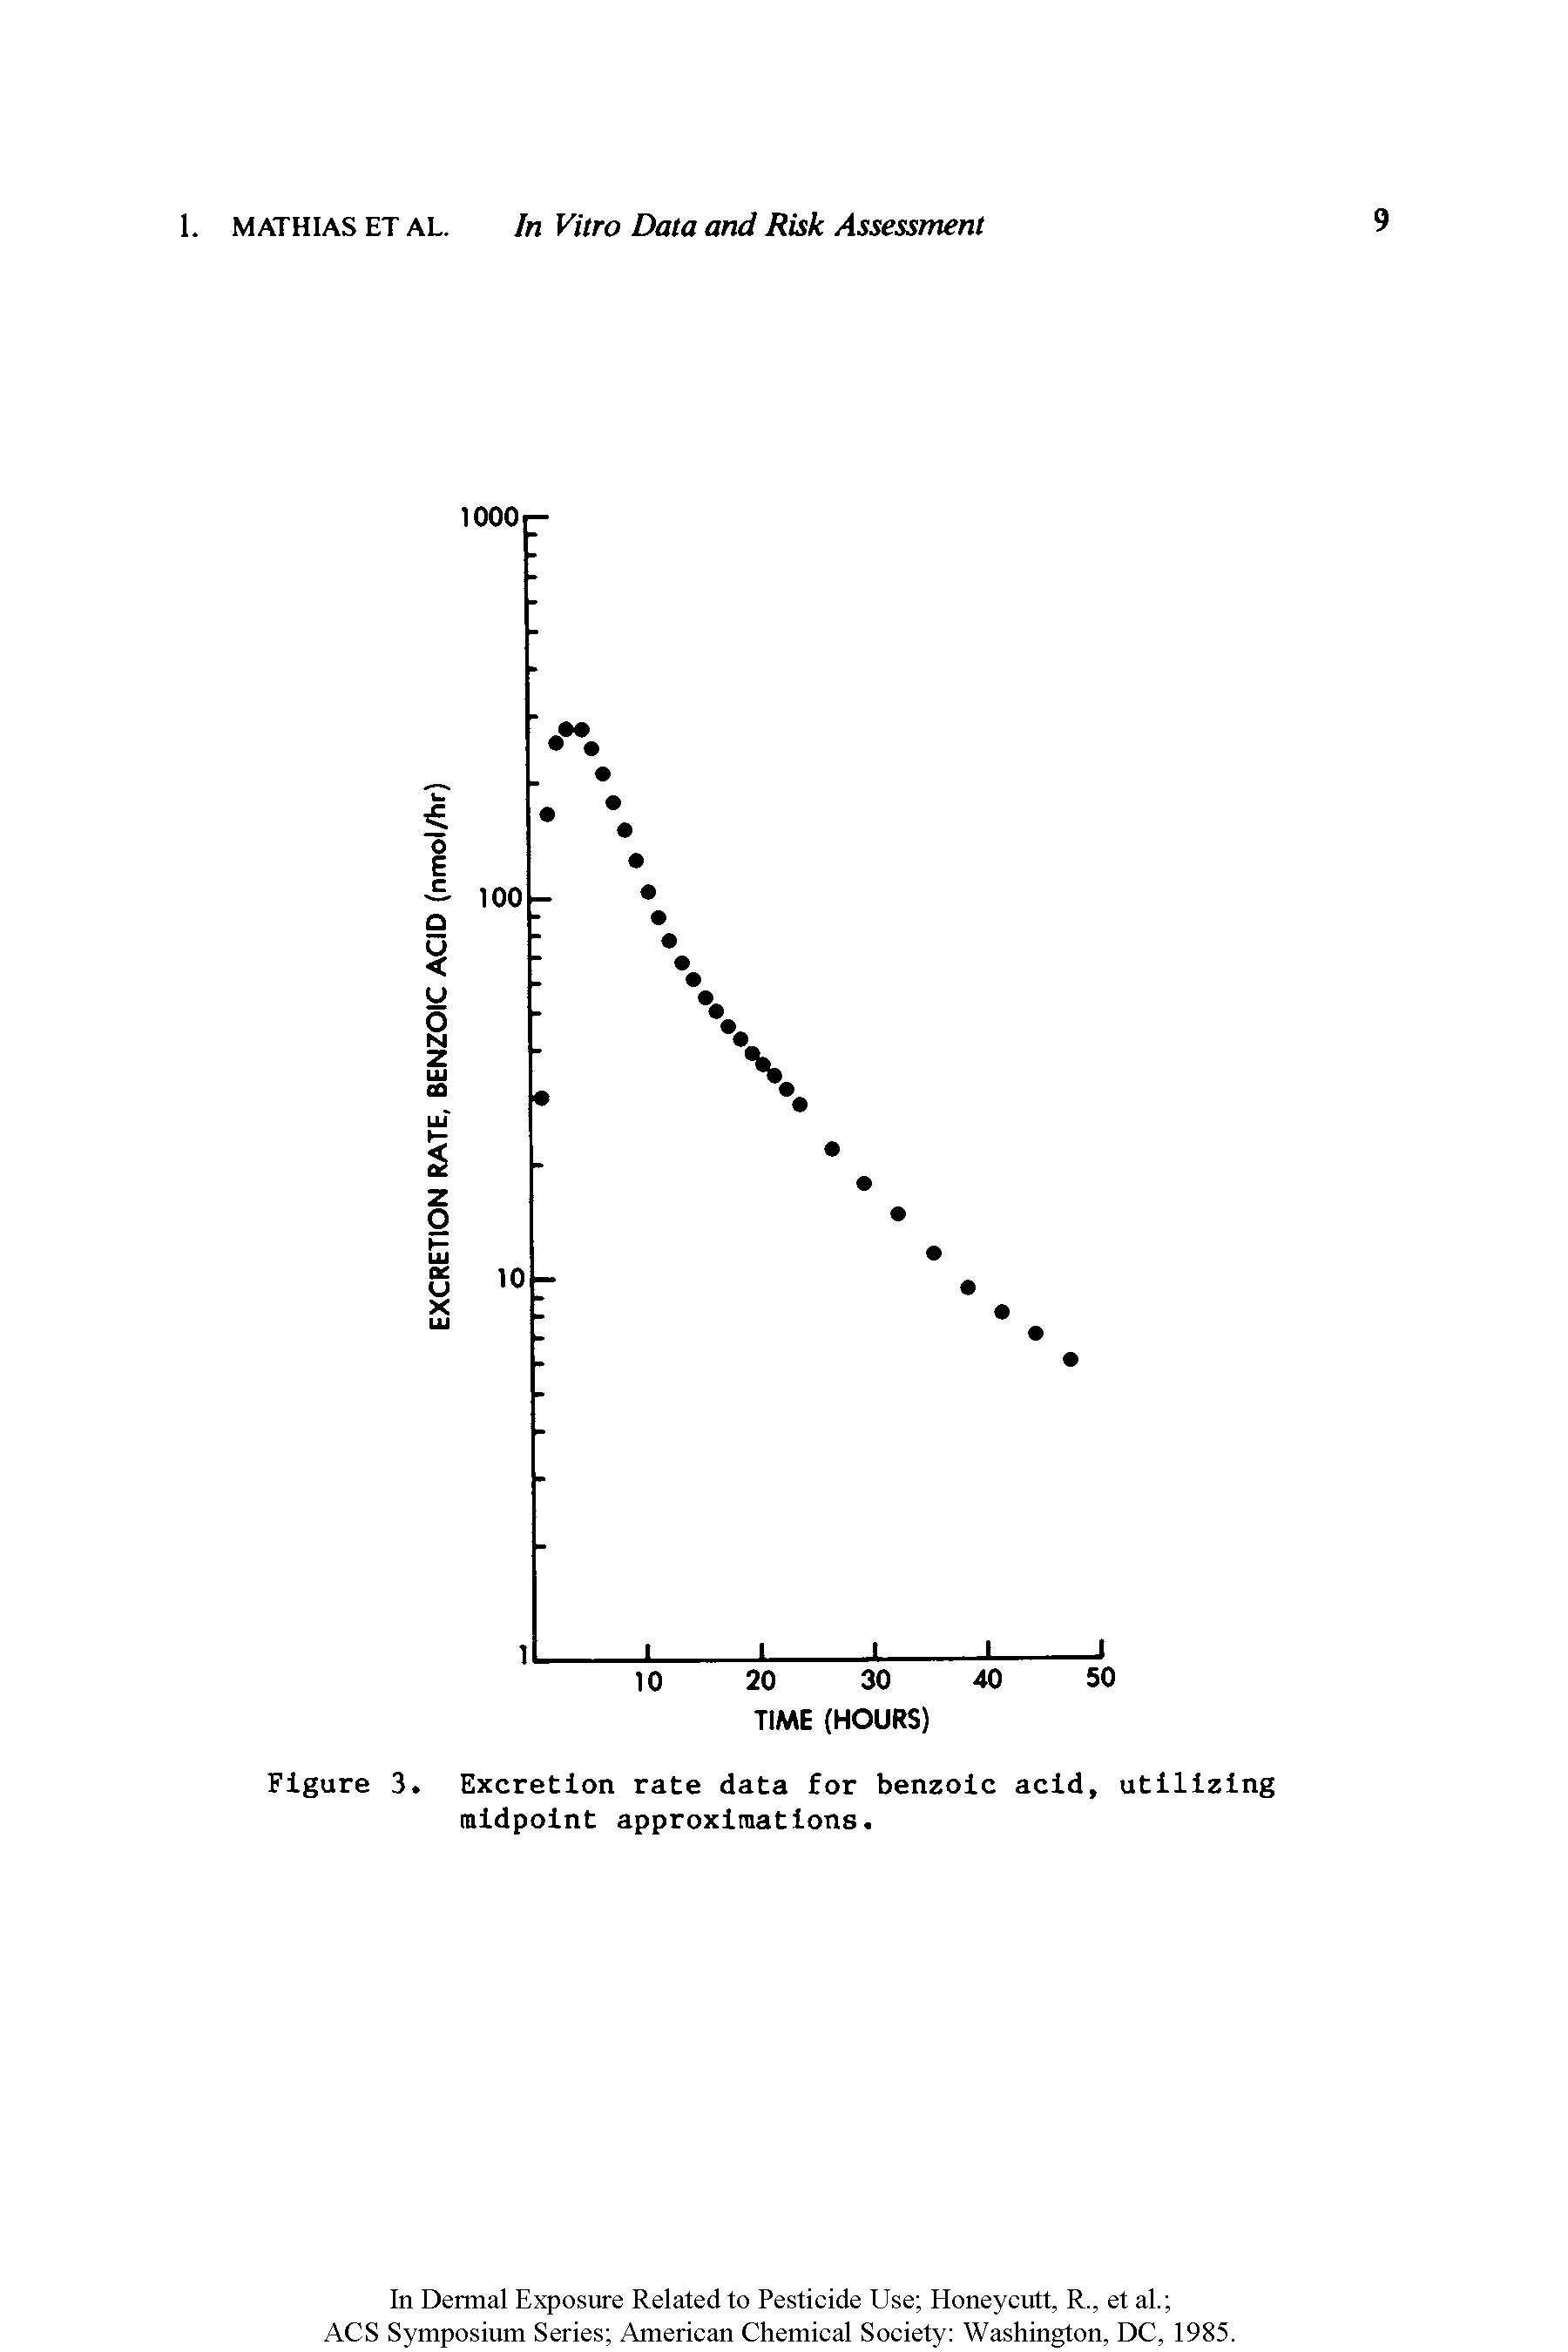 Figure 3. Excretion rate data for benzoic acid, utilizing midpoint approximations.